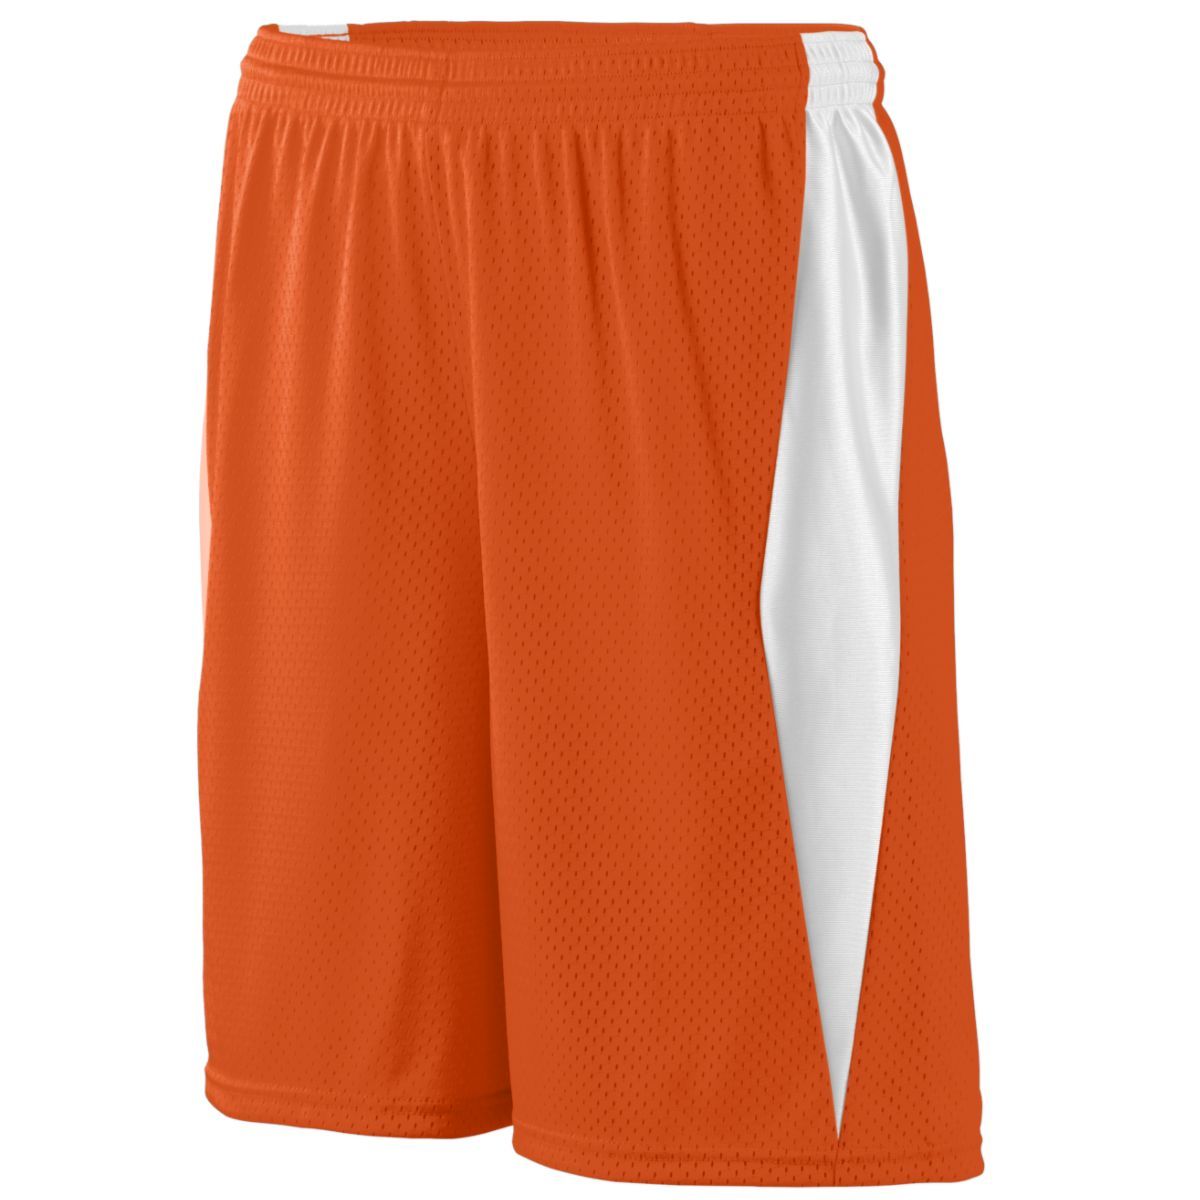 Augusta Sportswear Top Score Shorts in Orange/White  -Part of the Adult, Adult-Shorts, Augusta-Products, Lacrosse, All-Sports, All-Sports-1 product lines at KanaleyCreations.com